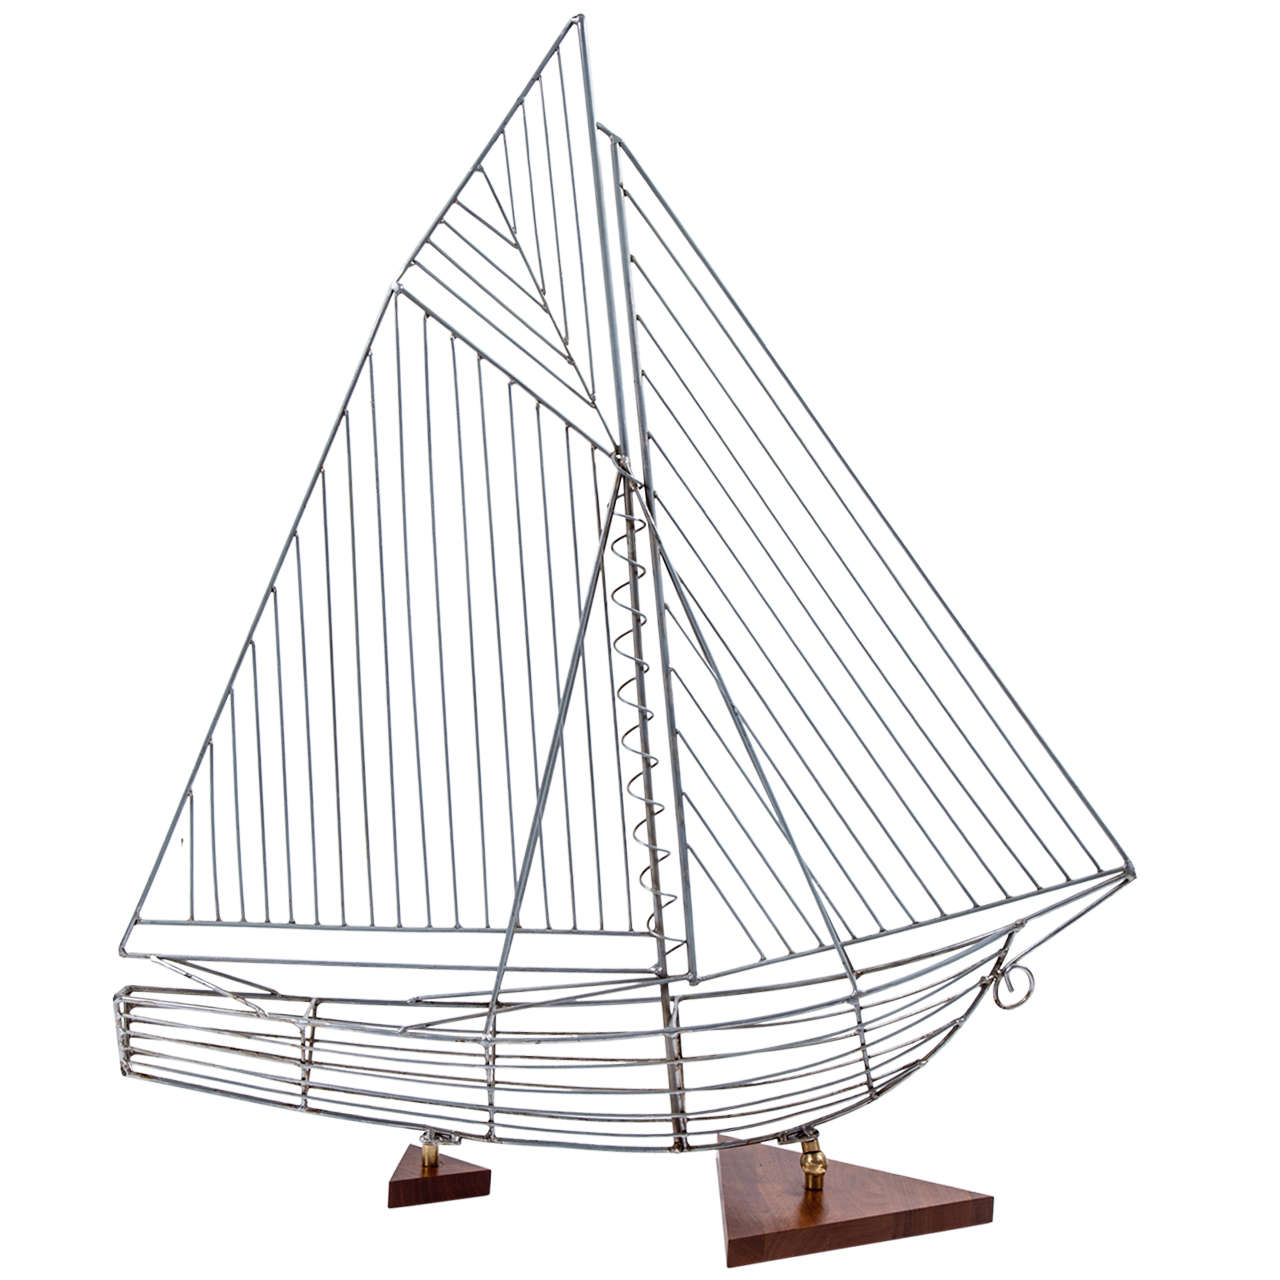 Modern Sailboat in the Style of Curtis Jere